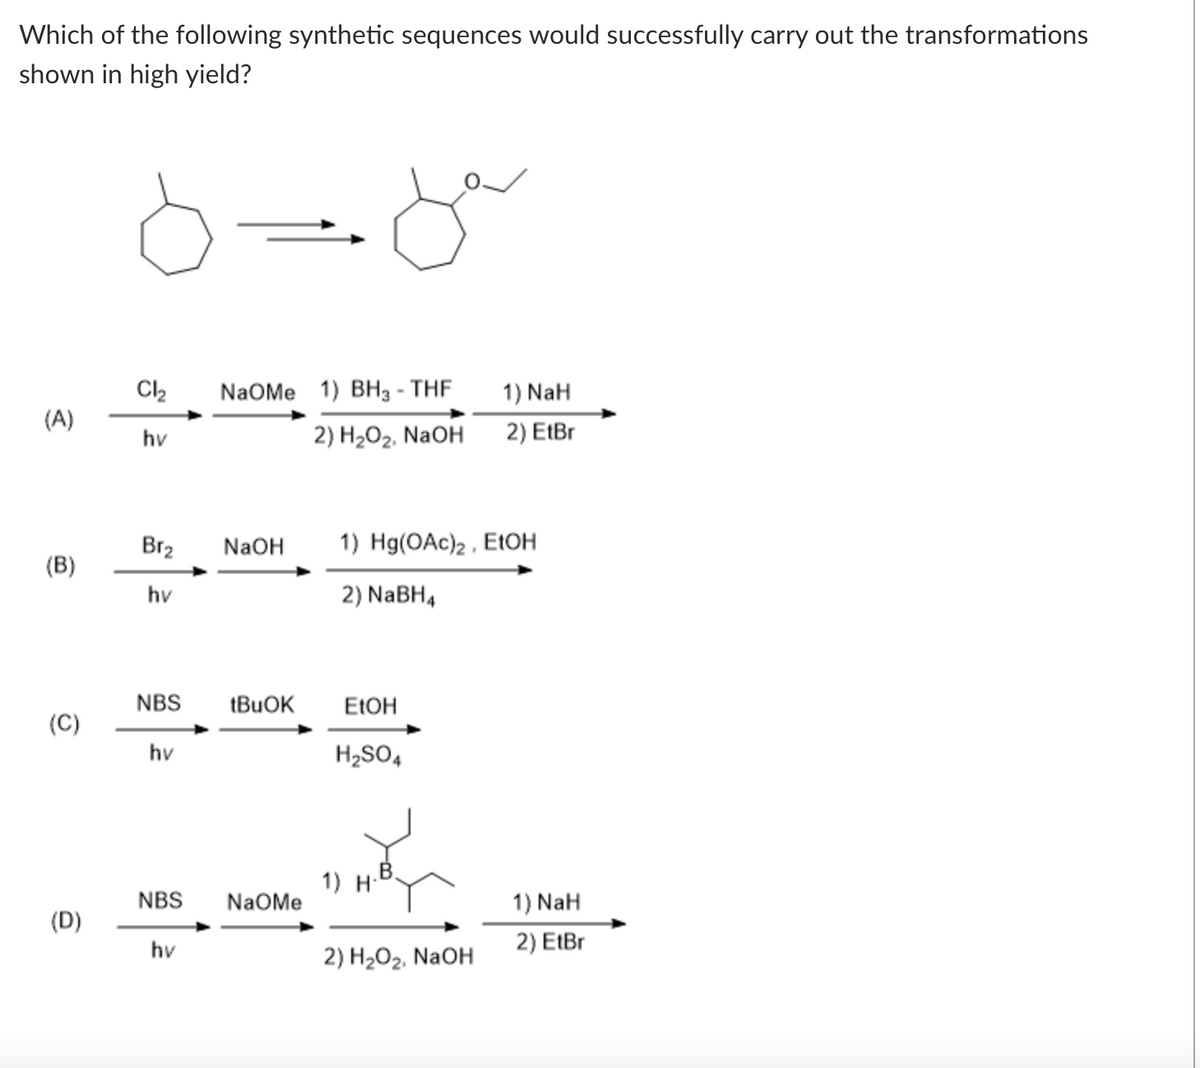 Which of the following synthetic sequences would successfully carry out the transformations
shown in high yield?
Cl₂
hv
(A)
(B)
(C)
(D)
Brz
hv
NBS
hv
NBS
hv
مل
NaOMe 1) BH3-THF
2) H₂O₂, NaOH
NaOH
tBuOK
NaOMe
1) NaH
2) EtBr
1) Hg(OAc)2, EtOH
2) NaBH4
EtOH
H₂SO4
1) H
2) H₂O₂, NaOH
1) NaH
2) EtBr